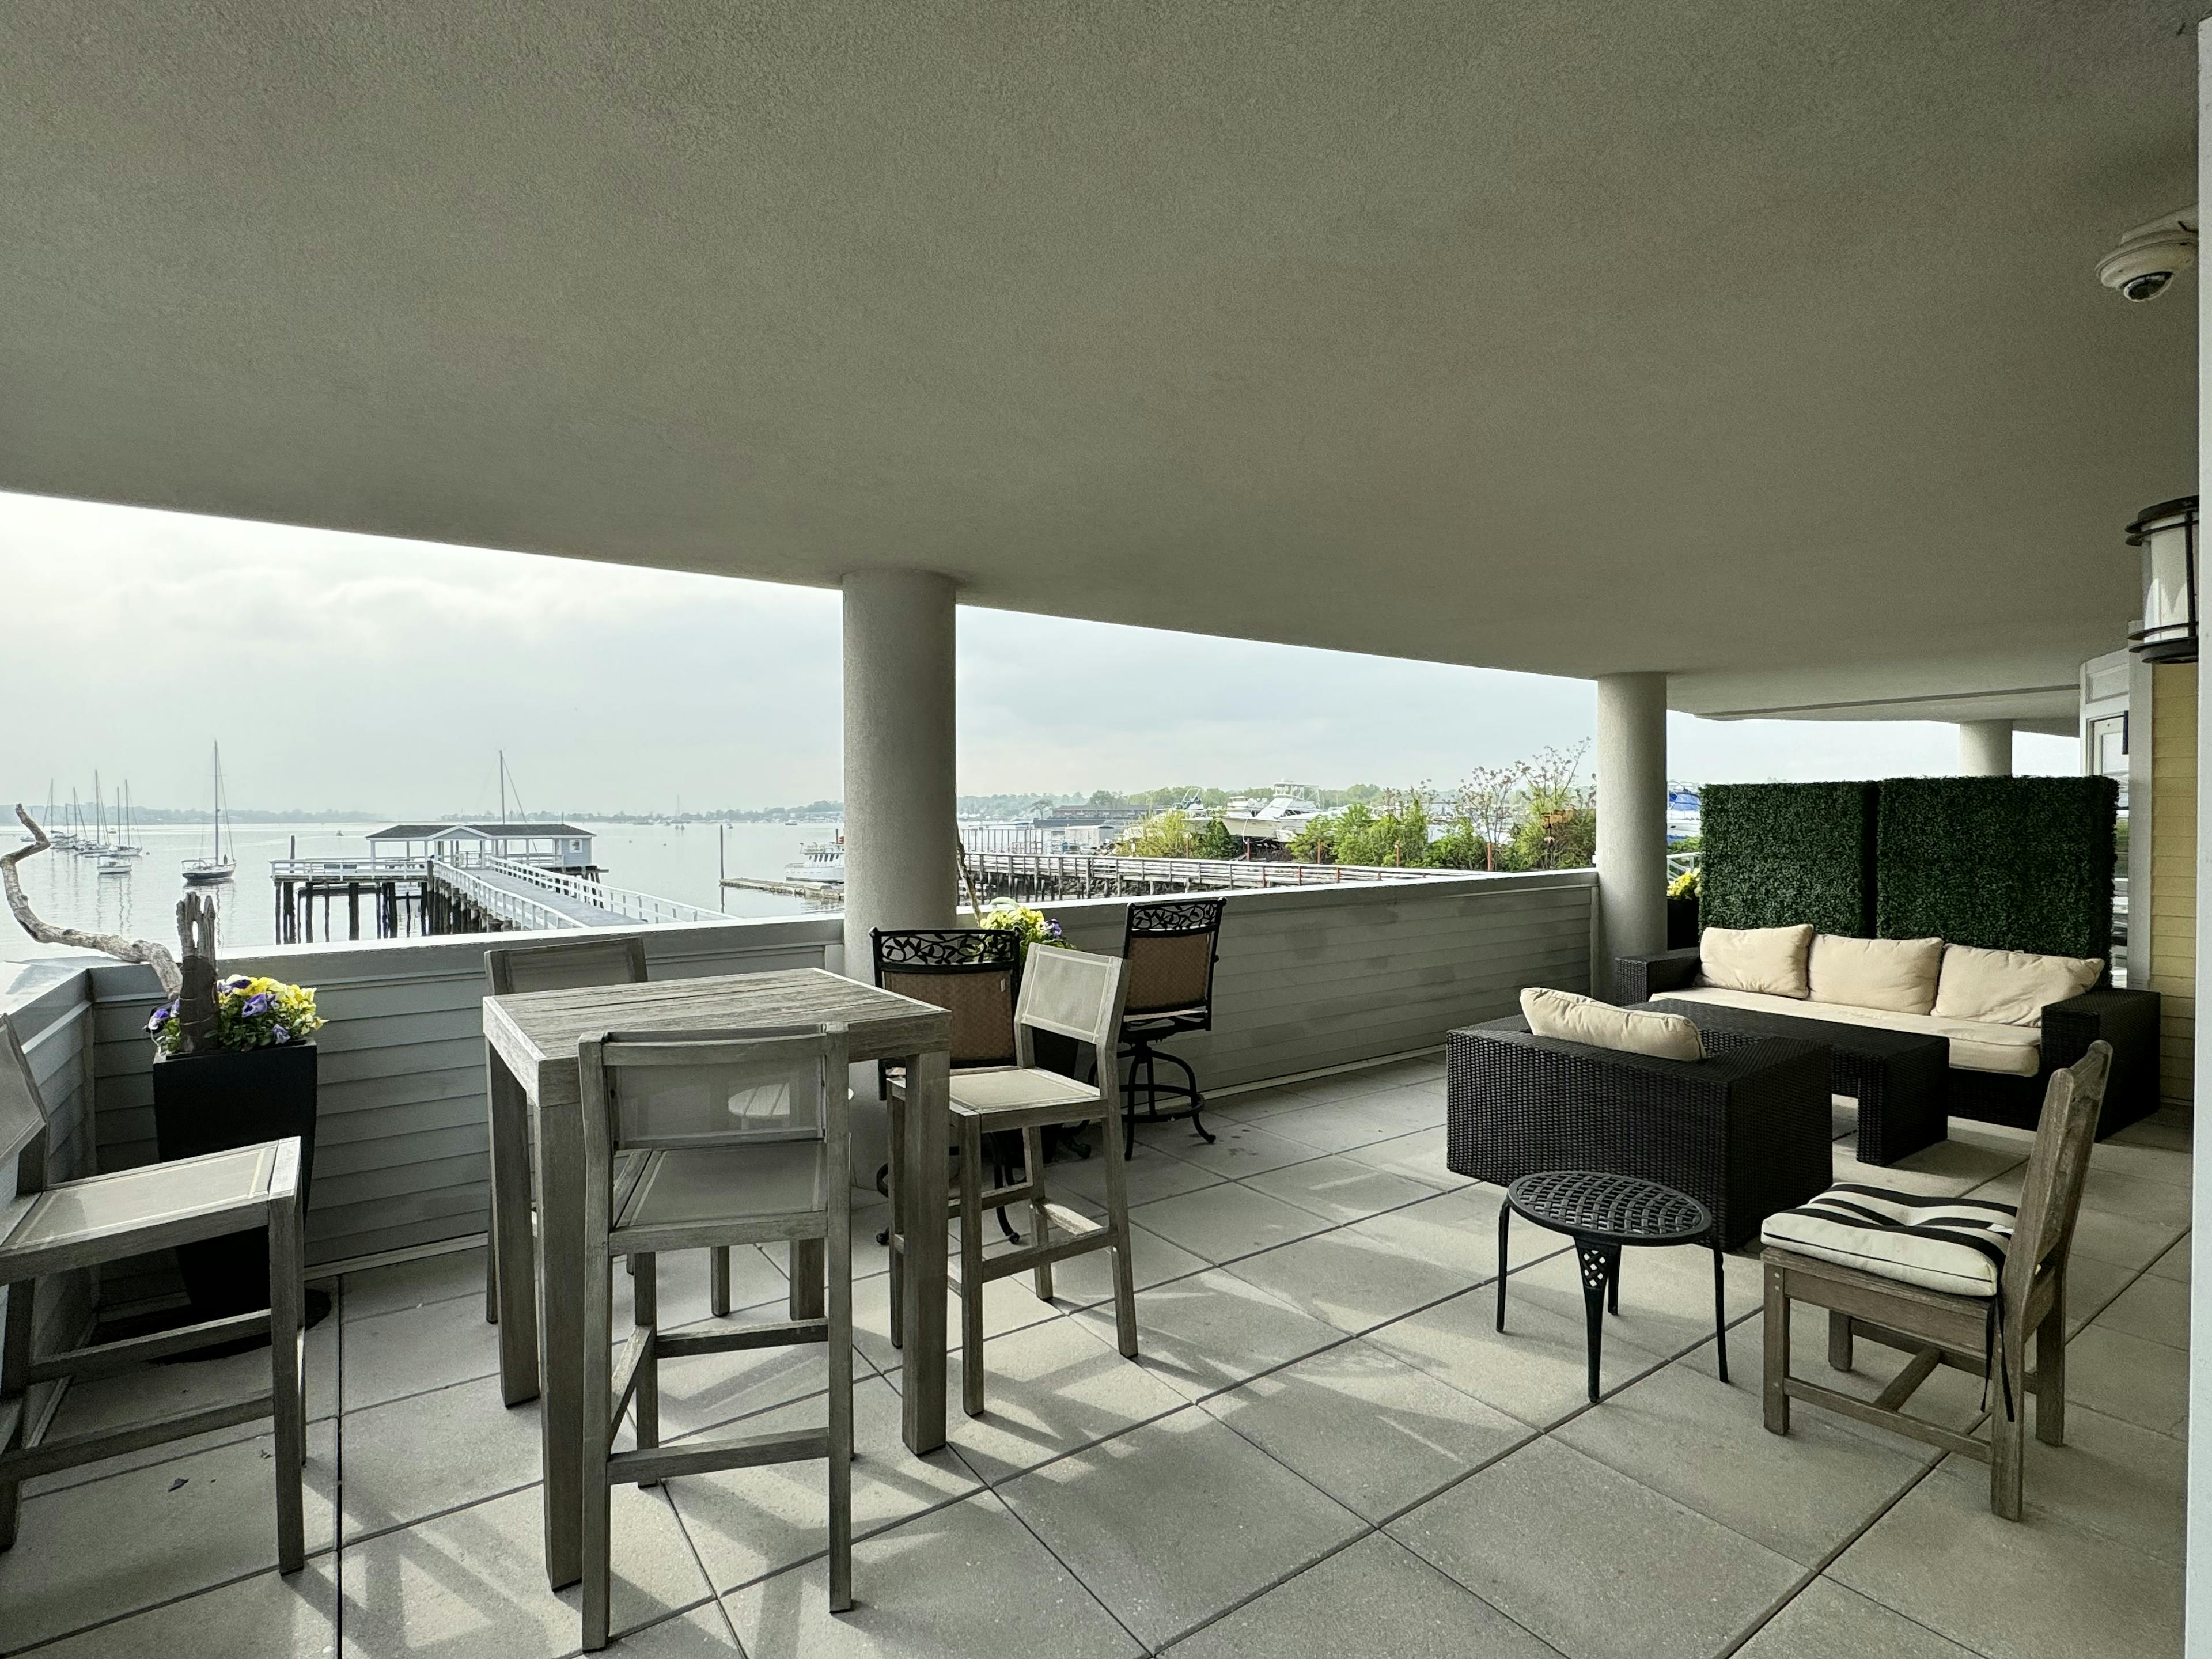 An outside terrace, with a wood table and 4 chairs, a sofa with cushions, and a view of Manhasset Bay